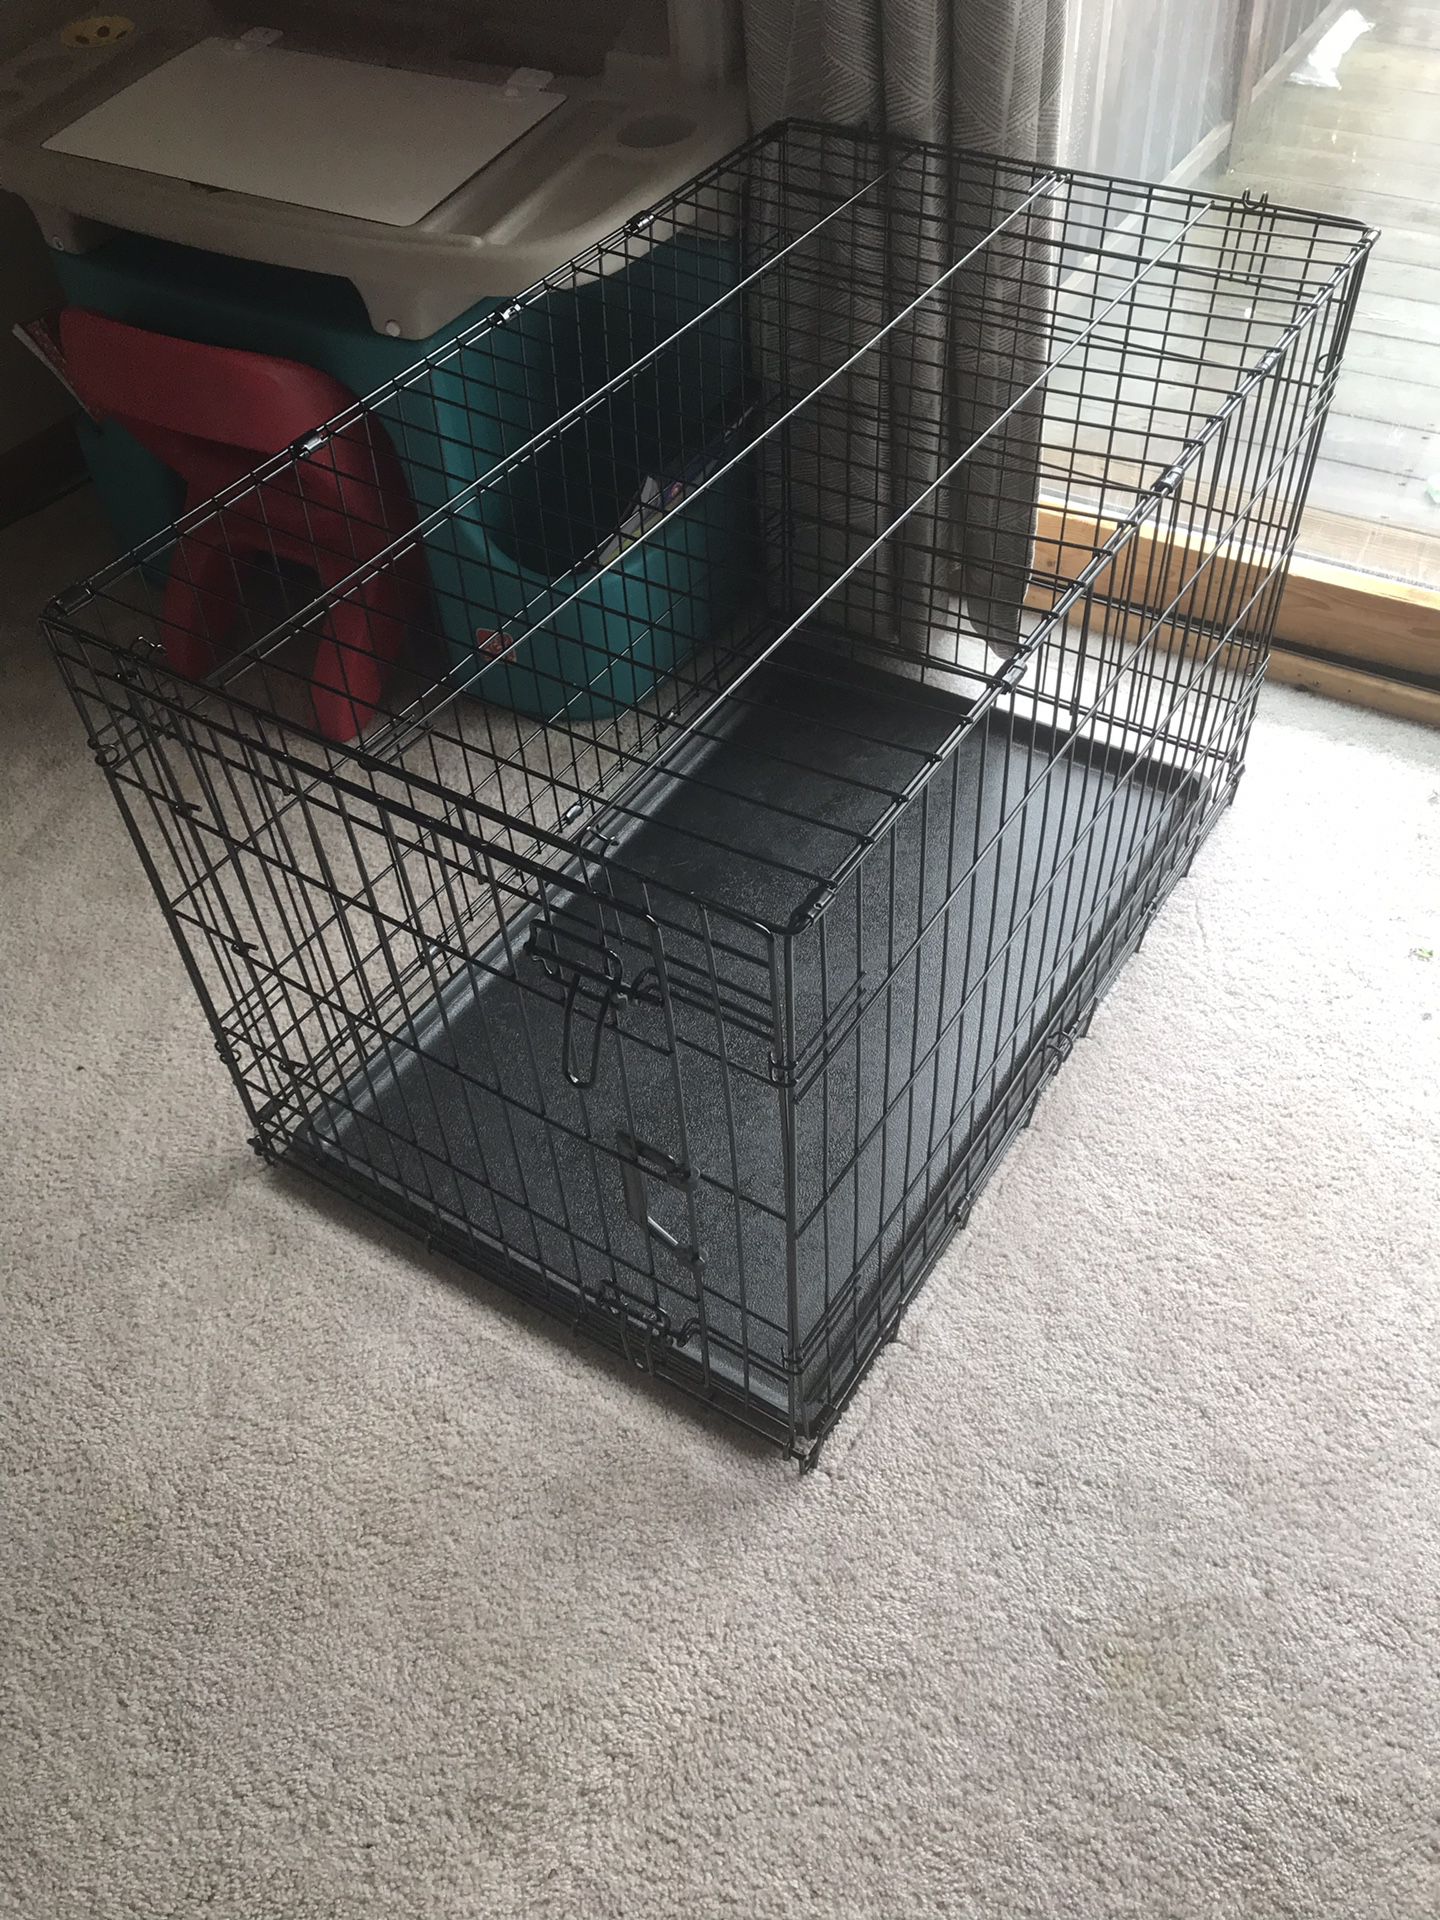 Medium size dog crate with training pads